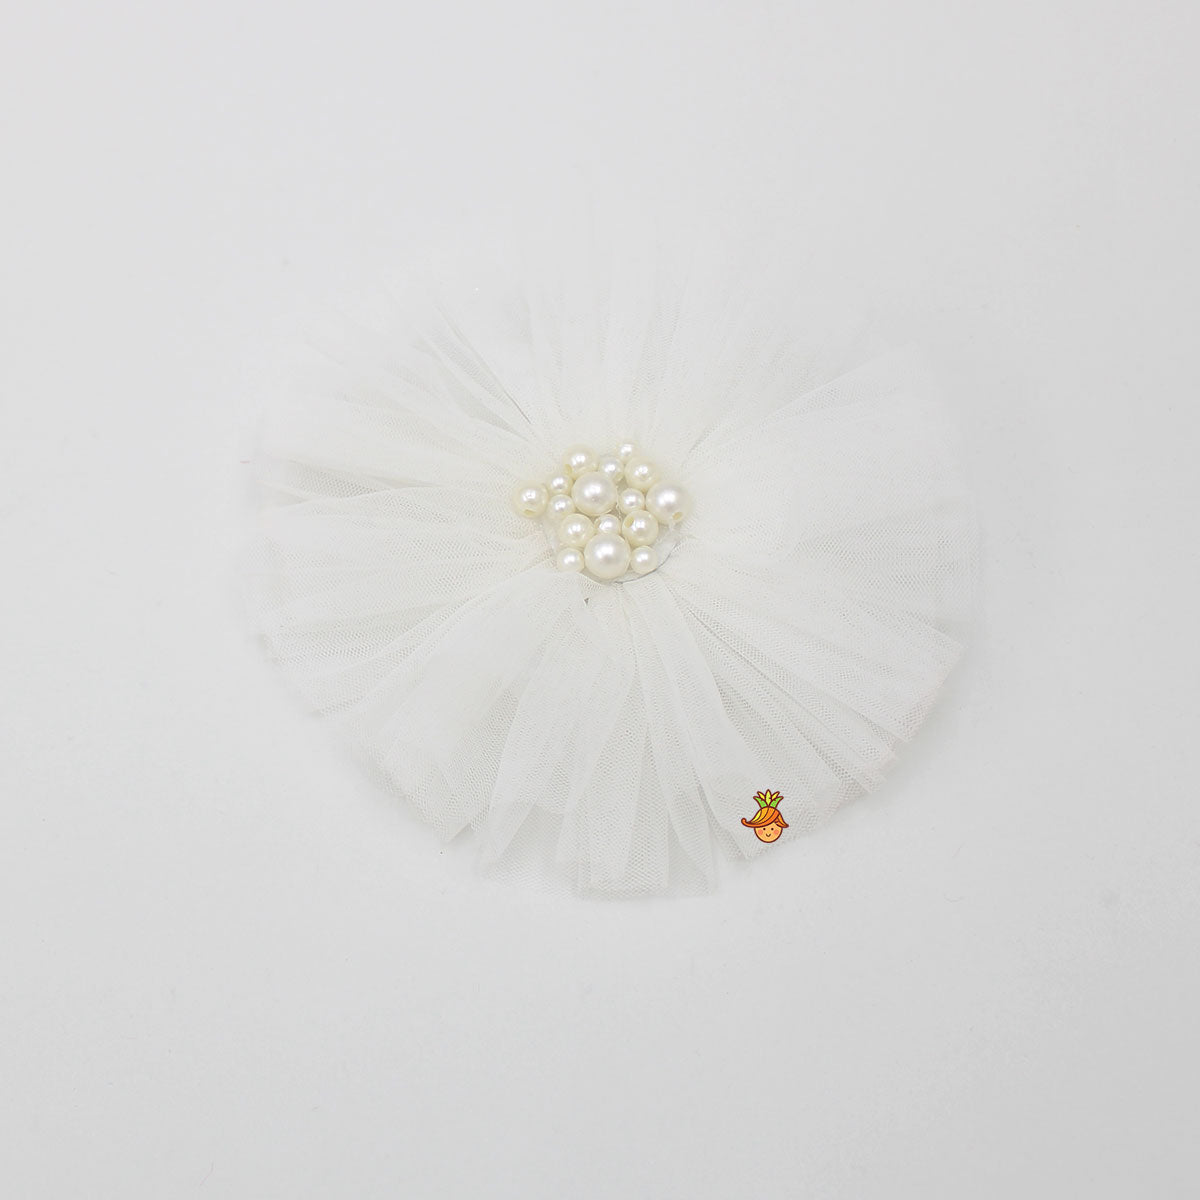 White Pearls Adorned Frilly Cute Hair Clip